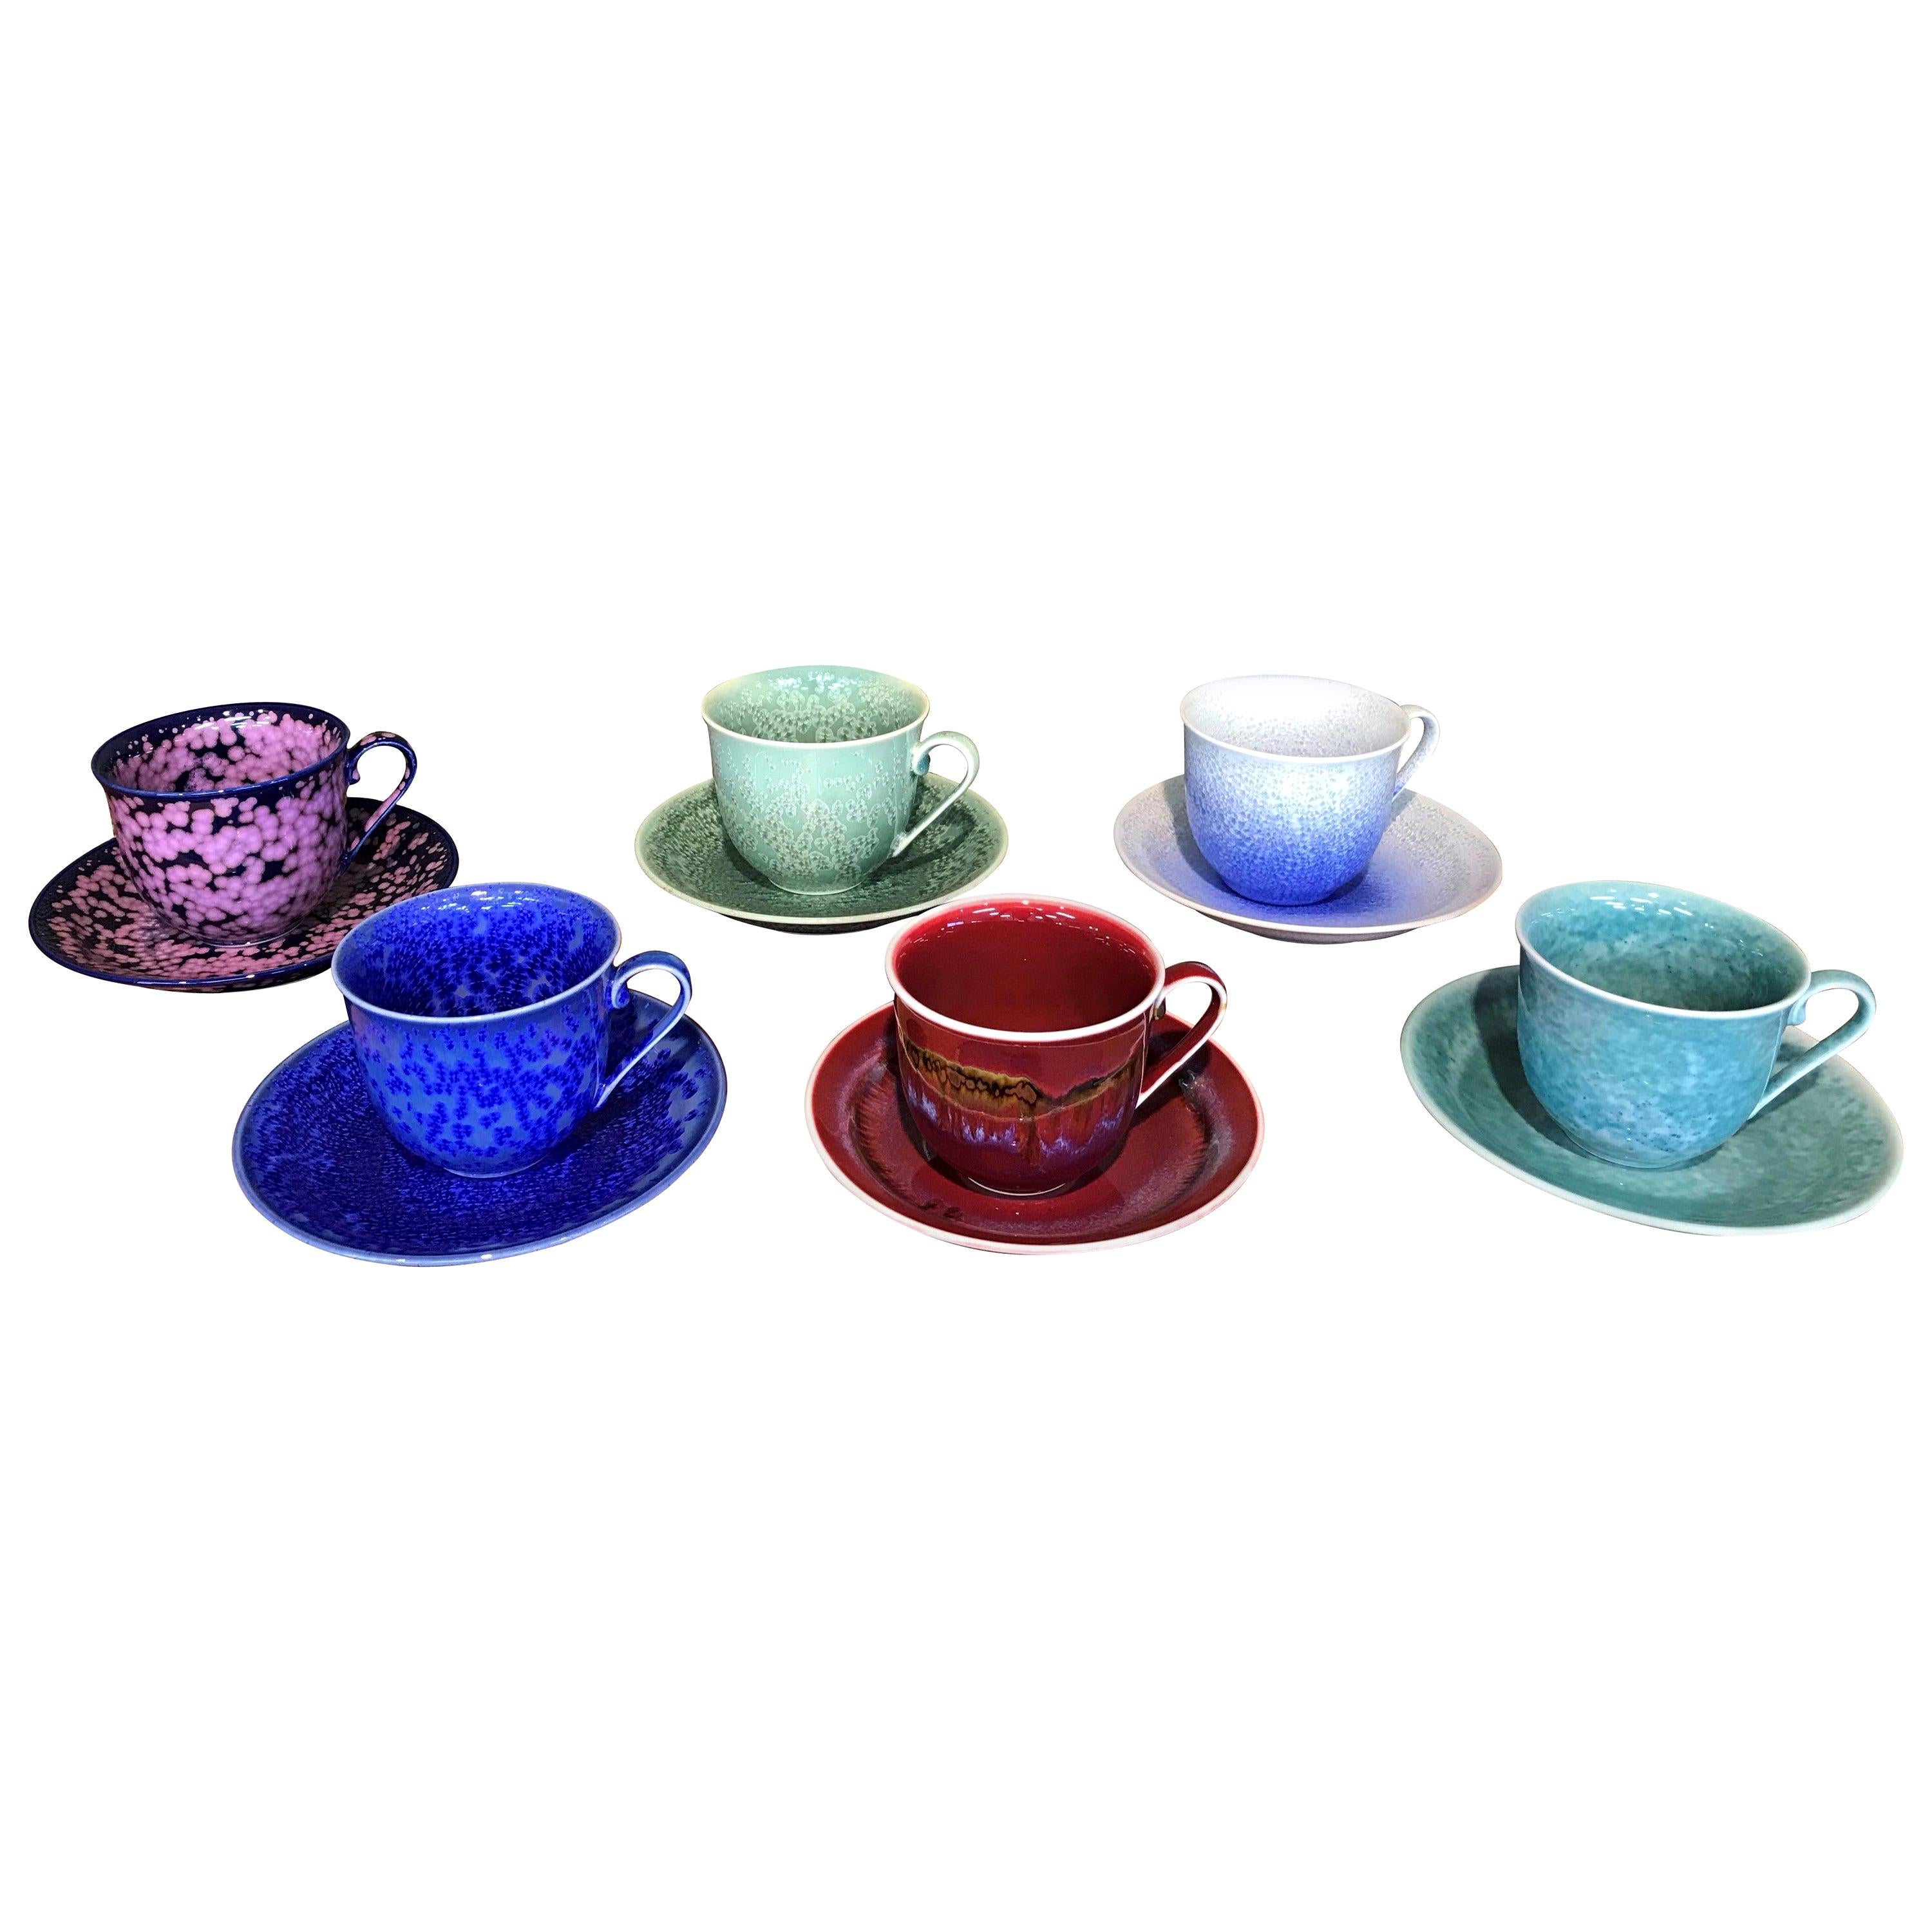 Set of Contemporary Japanese Glazed Porcelain Cups and Saucers by Master Artist